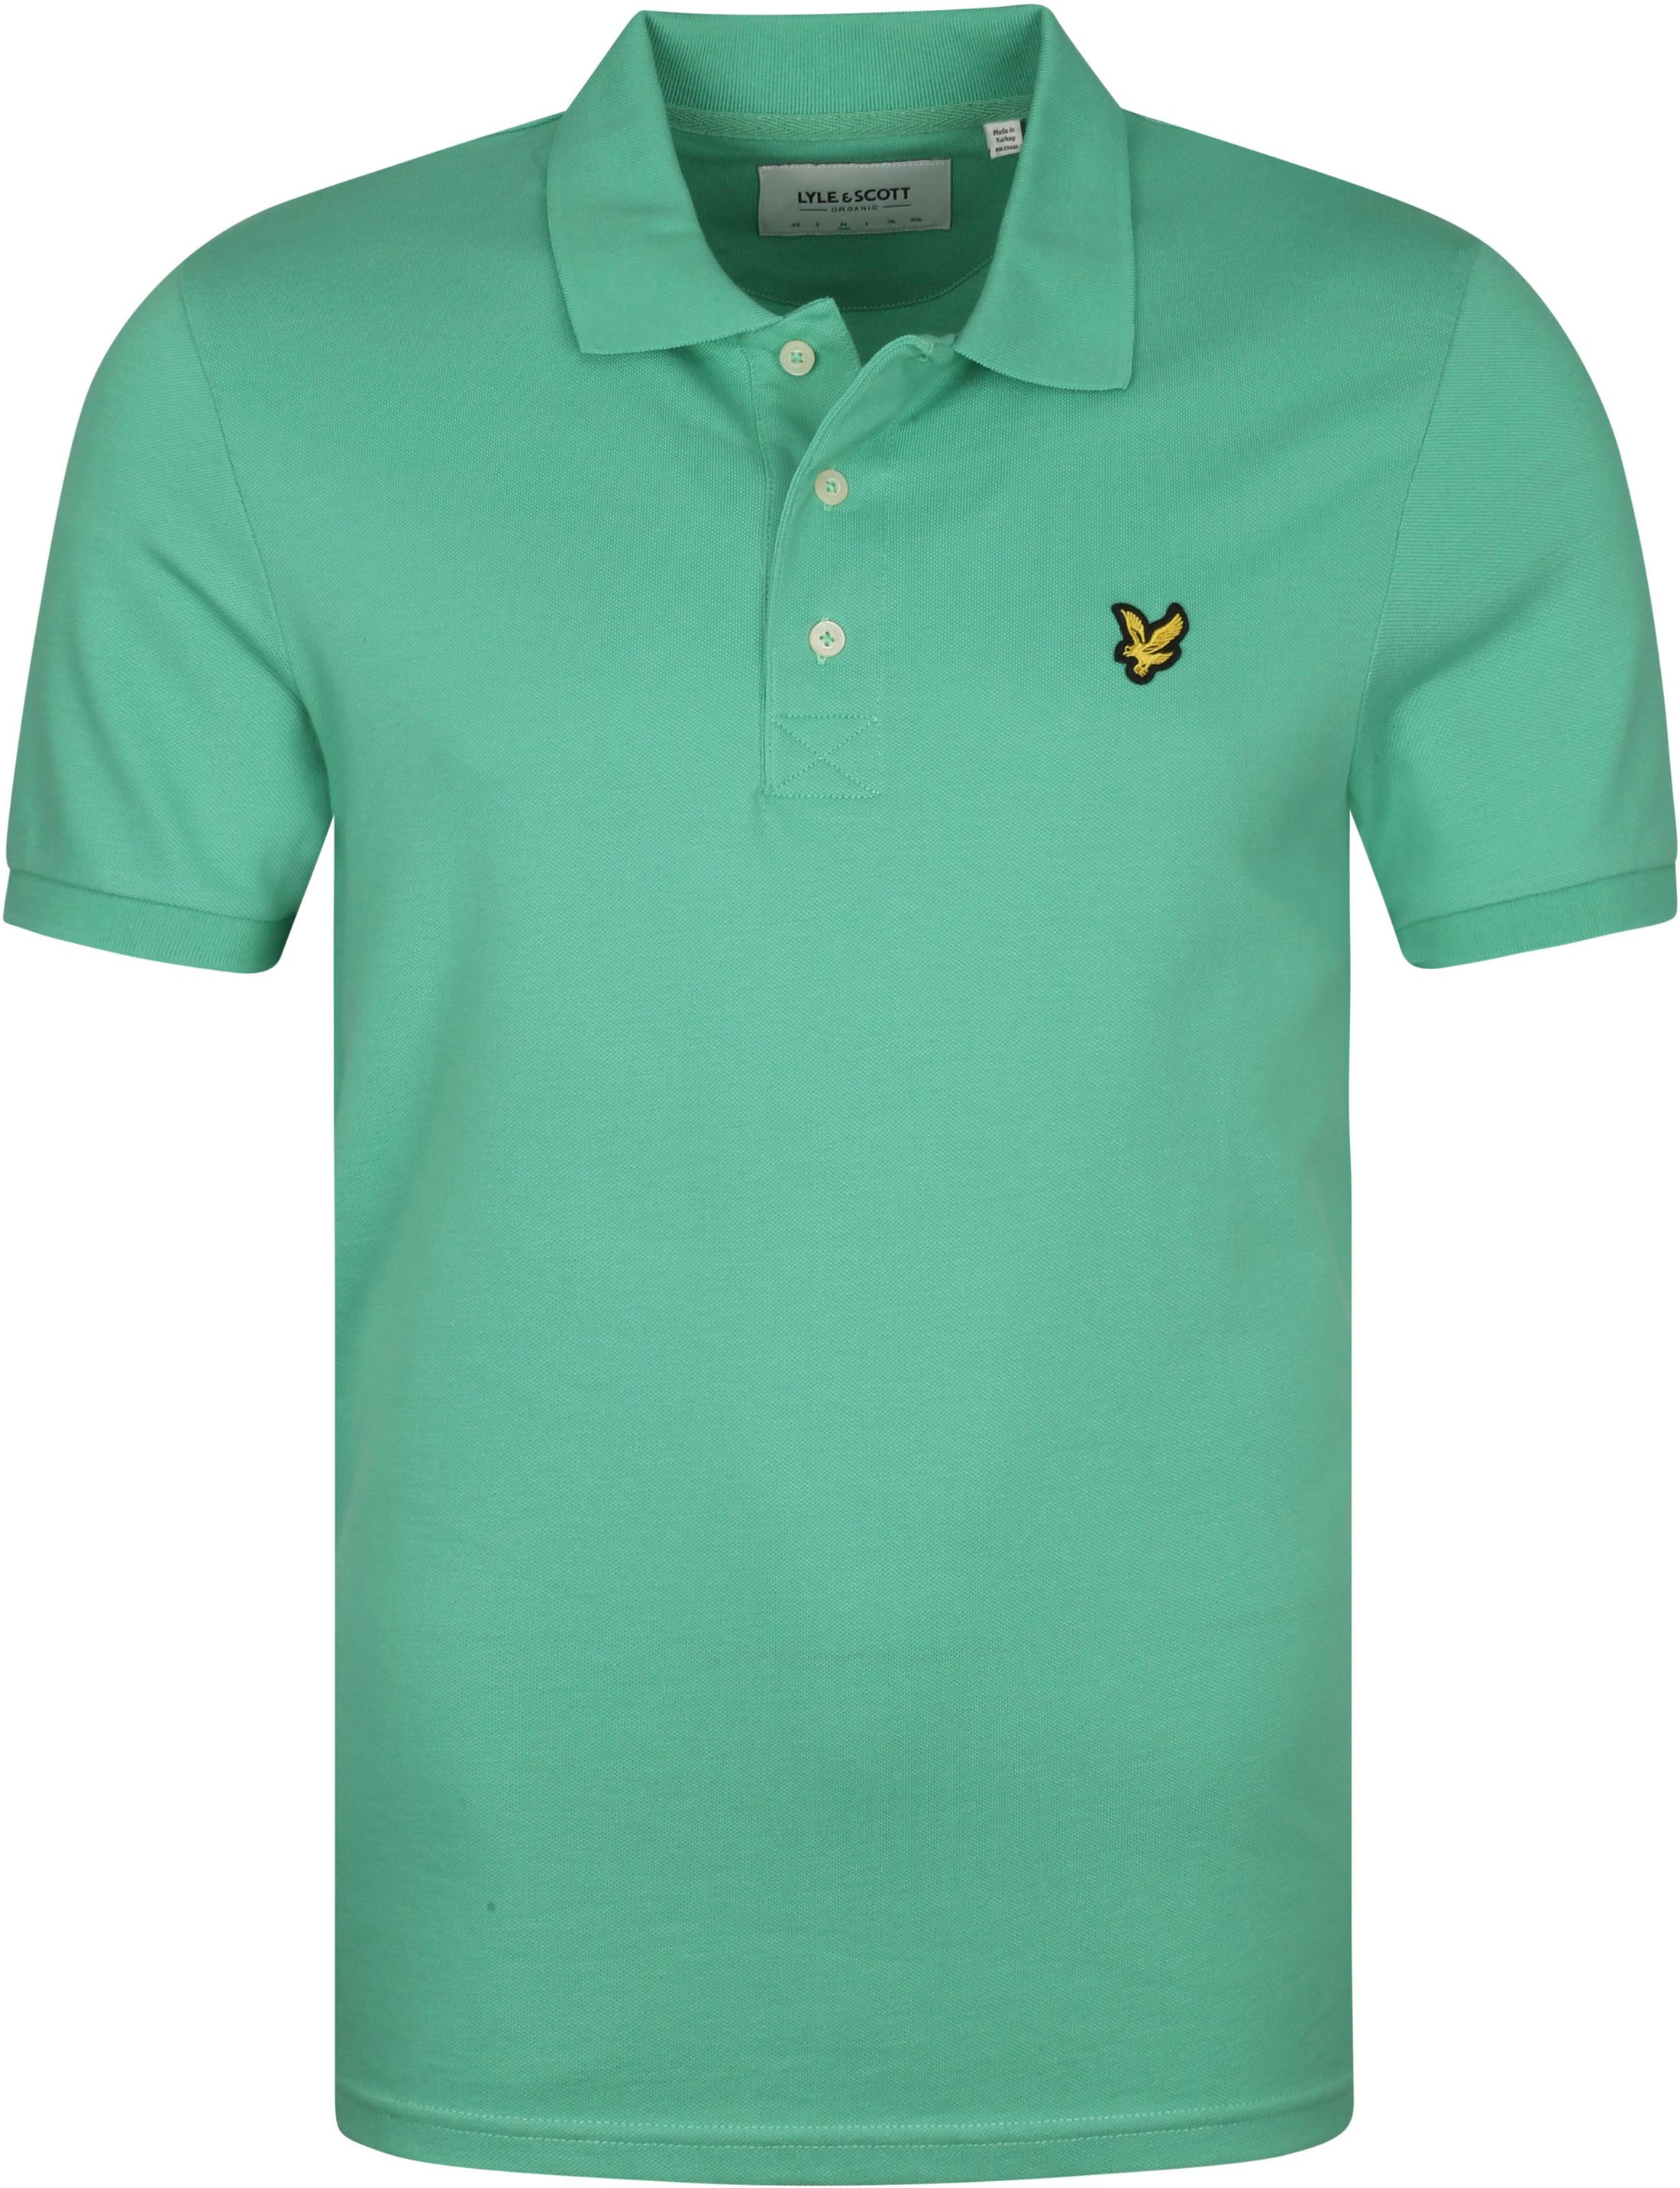 Lyle and Scott Polo Green size L